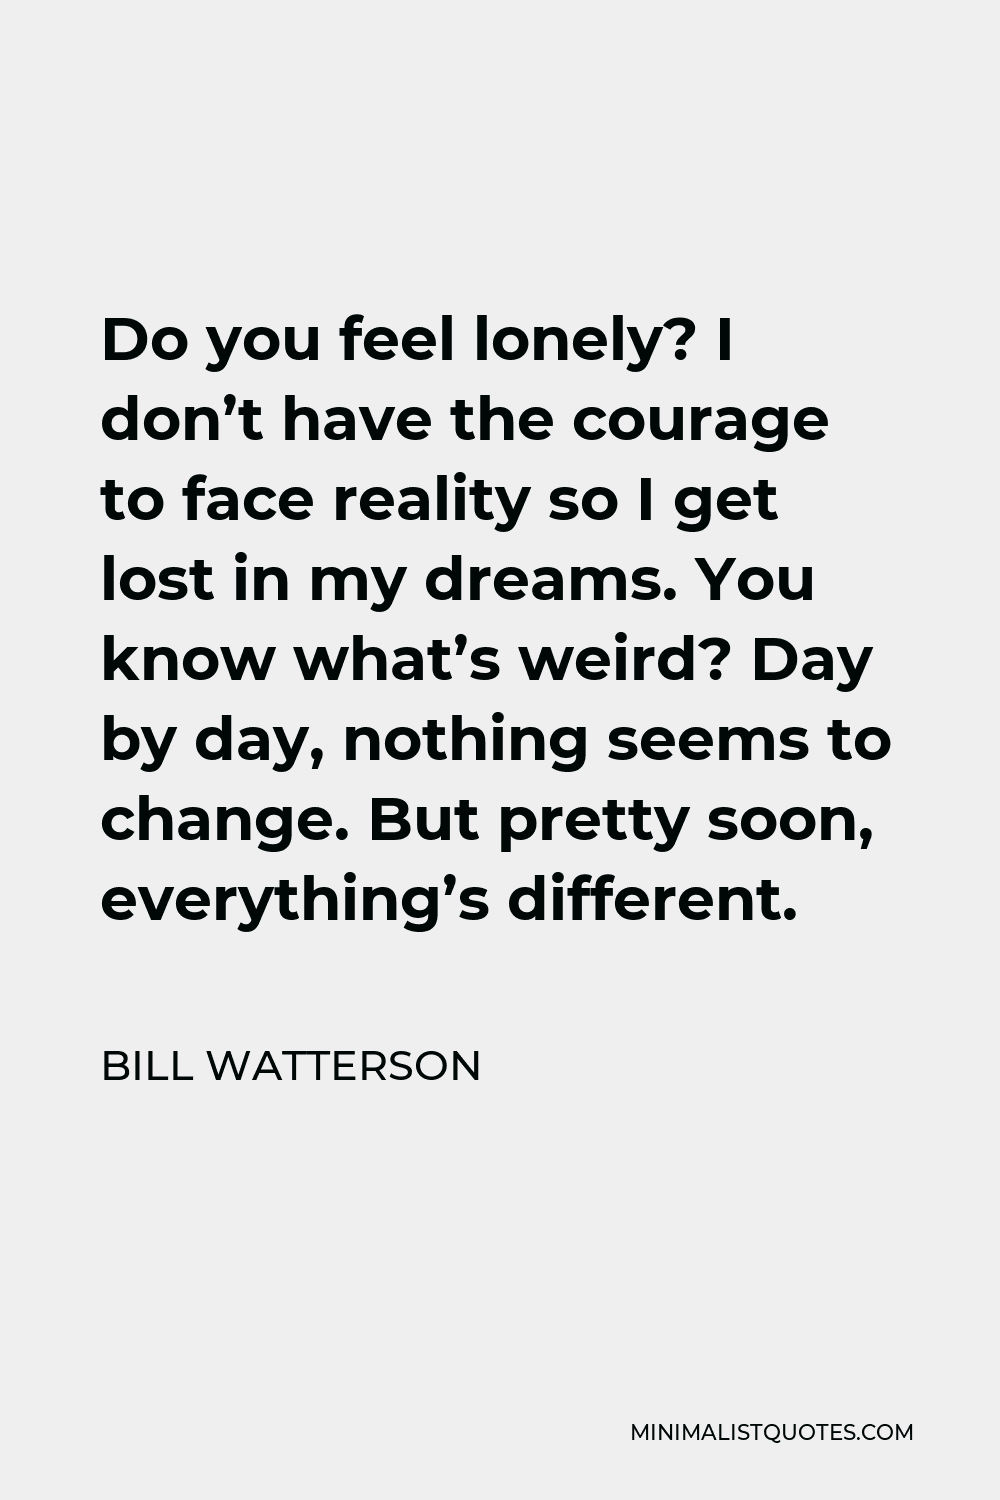 Bill Watterson Quote - Do you feel lonely? I don’t have the courage to face reality so I get lost in my dreams. You know what’s weird? Day by day, nothing seems to change. But pretty soon, everything’s different.